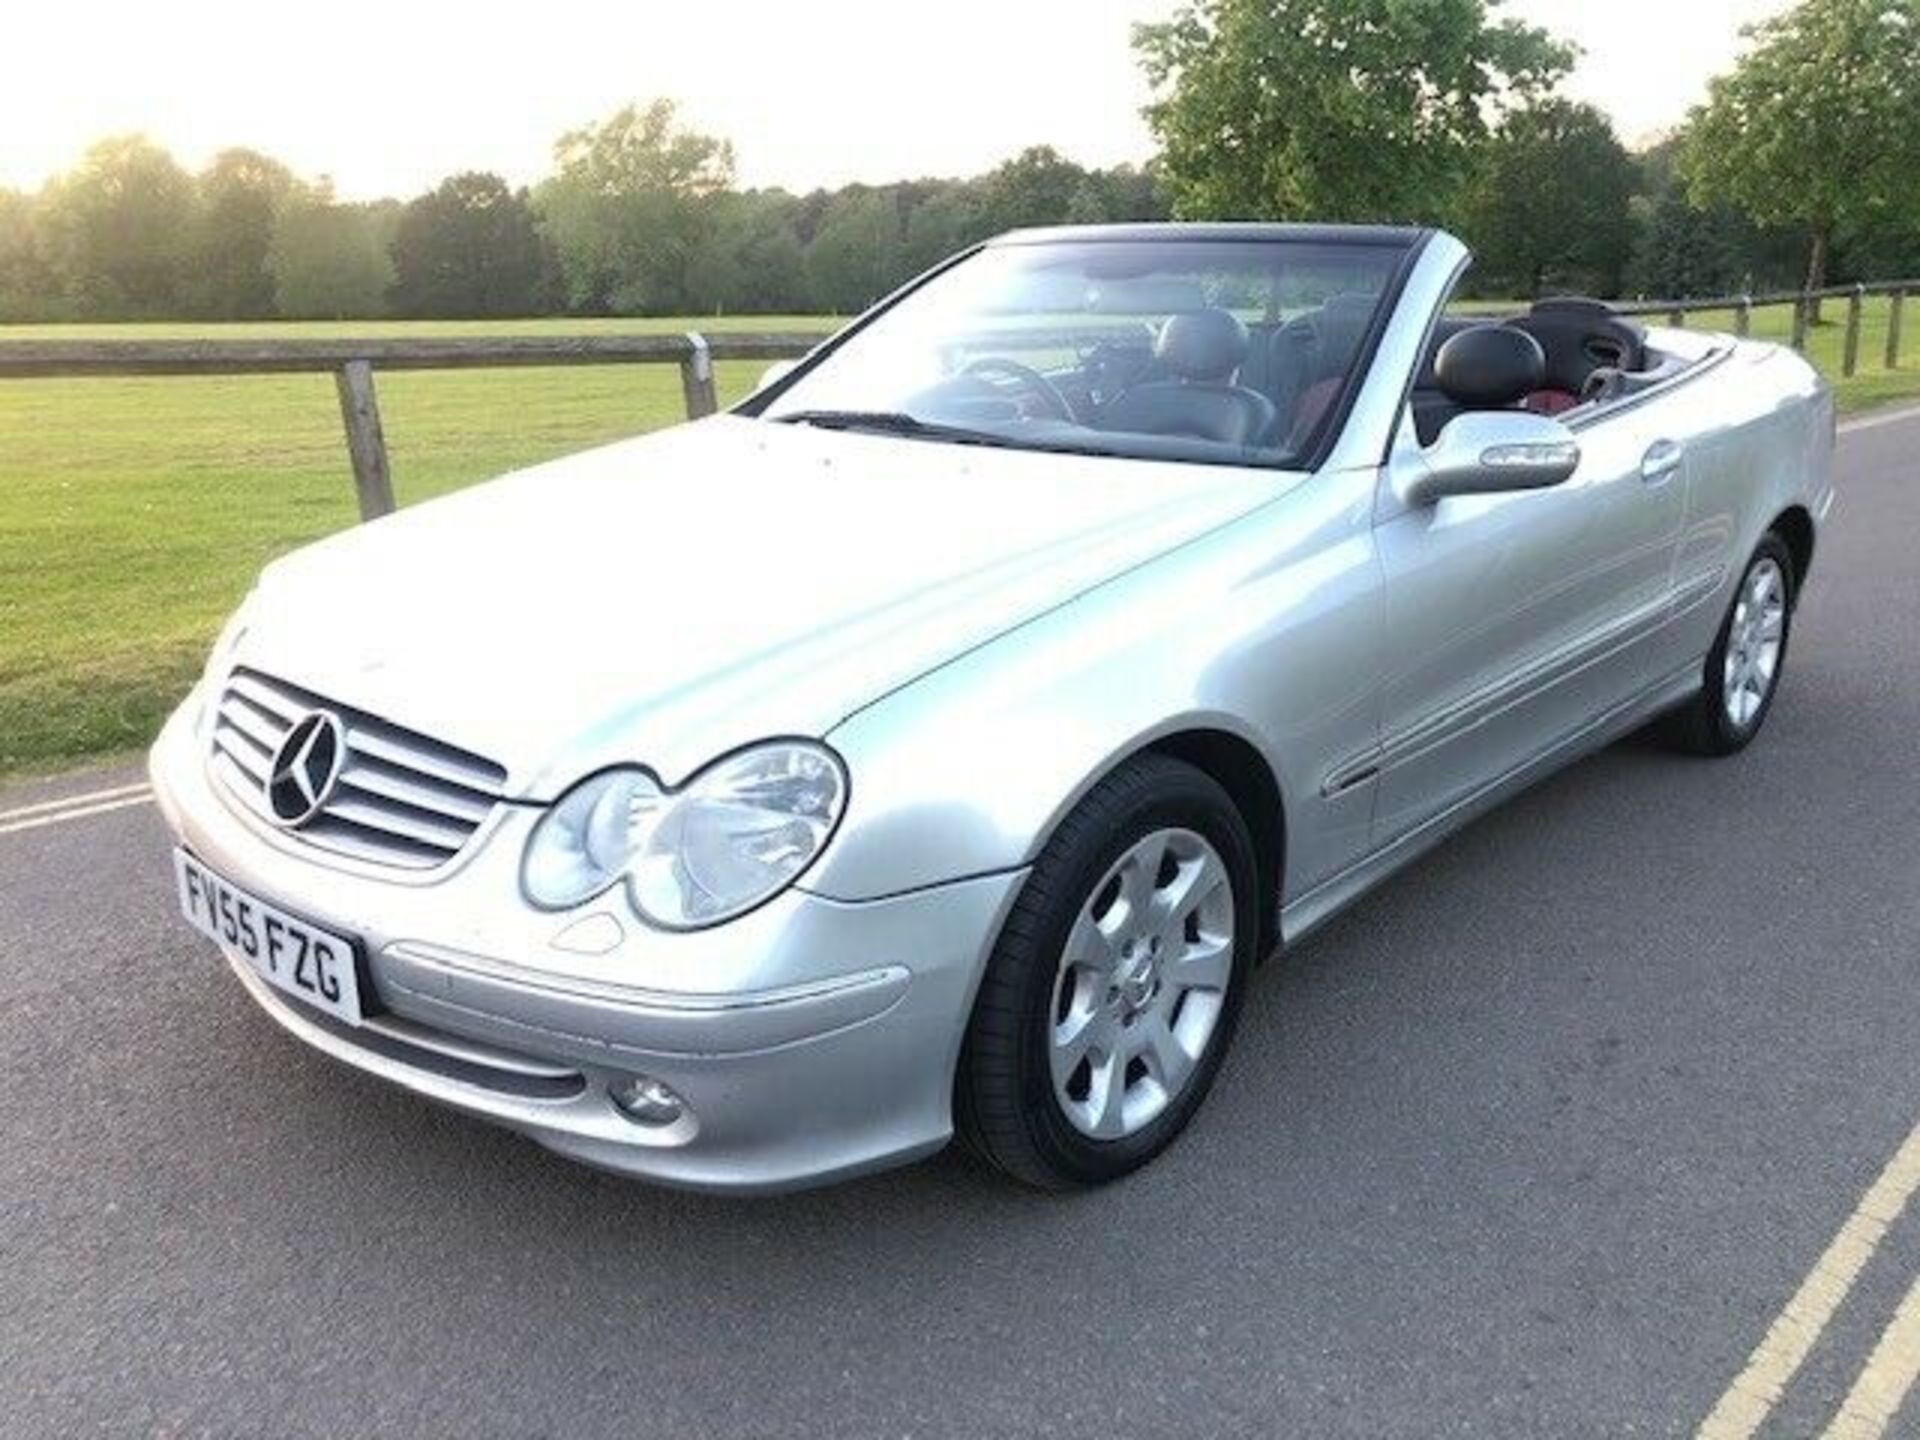 2005/55 REG MERCEDES CLK 240 ELEGANCE 2.6 AUTO PETROL CONVERTIBLE, SHOWING 0 FORMER KEEPERS *NO VAT* - Image 2 of 9